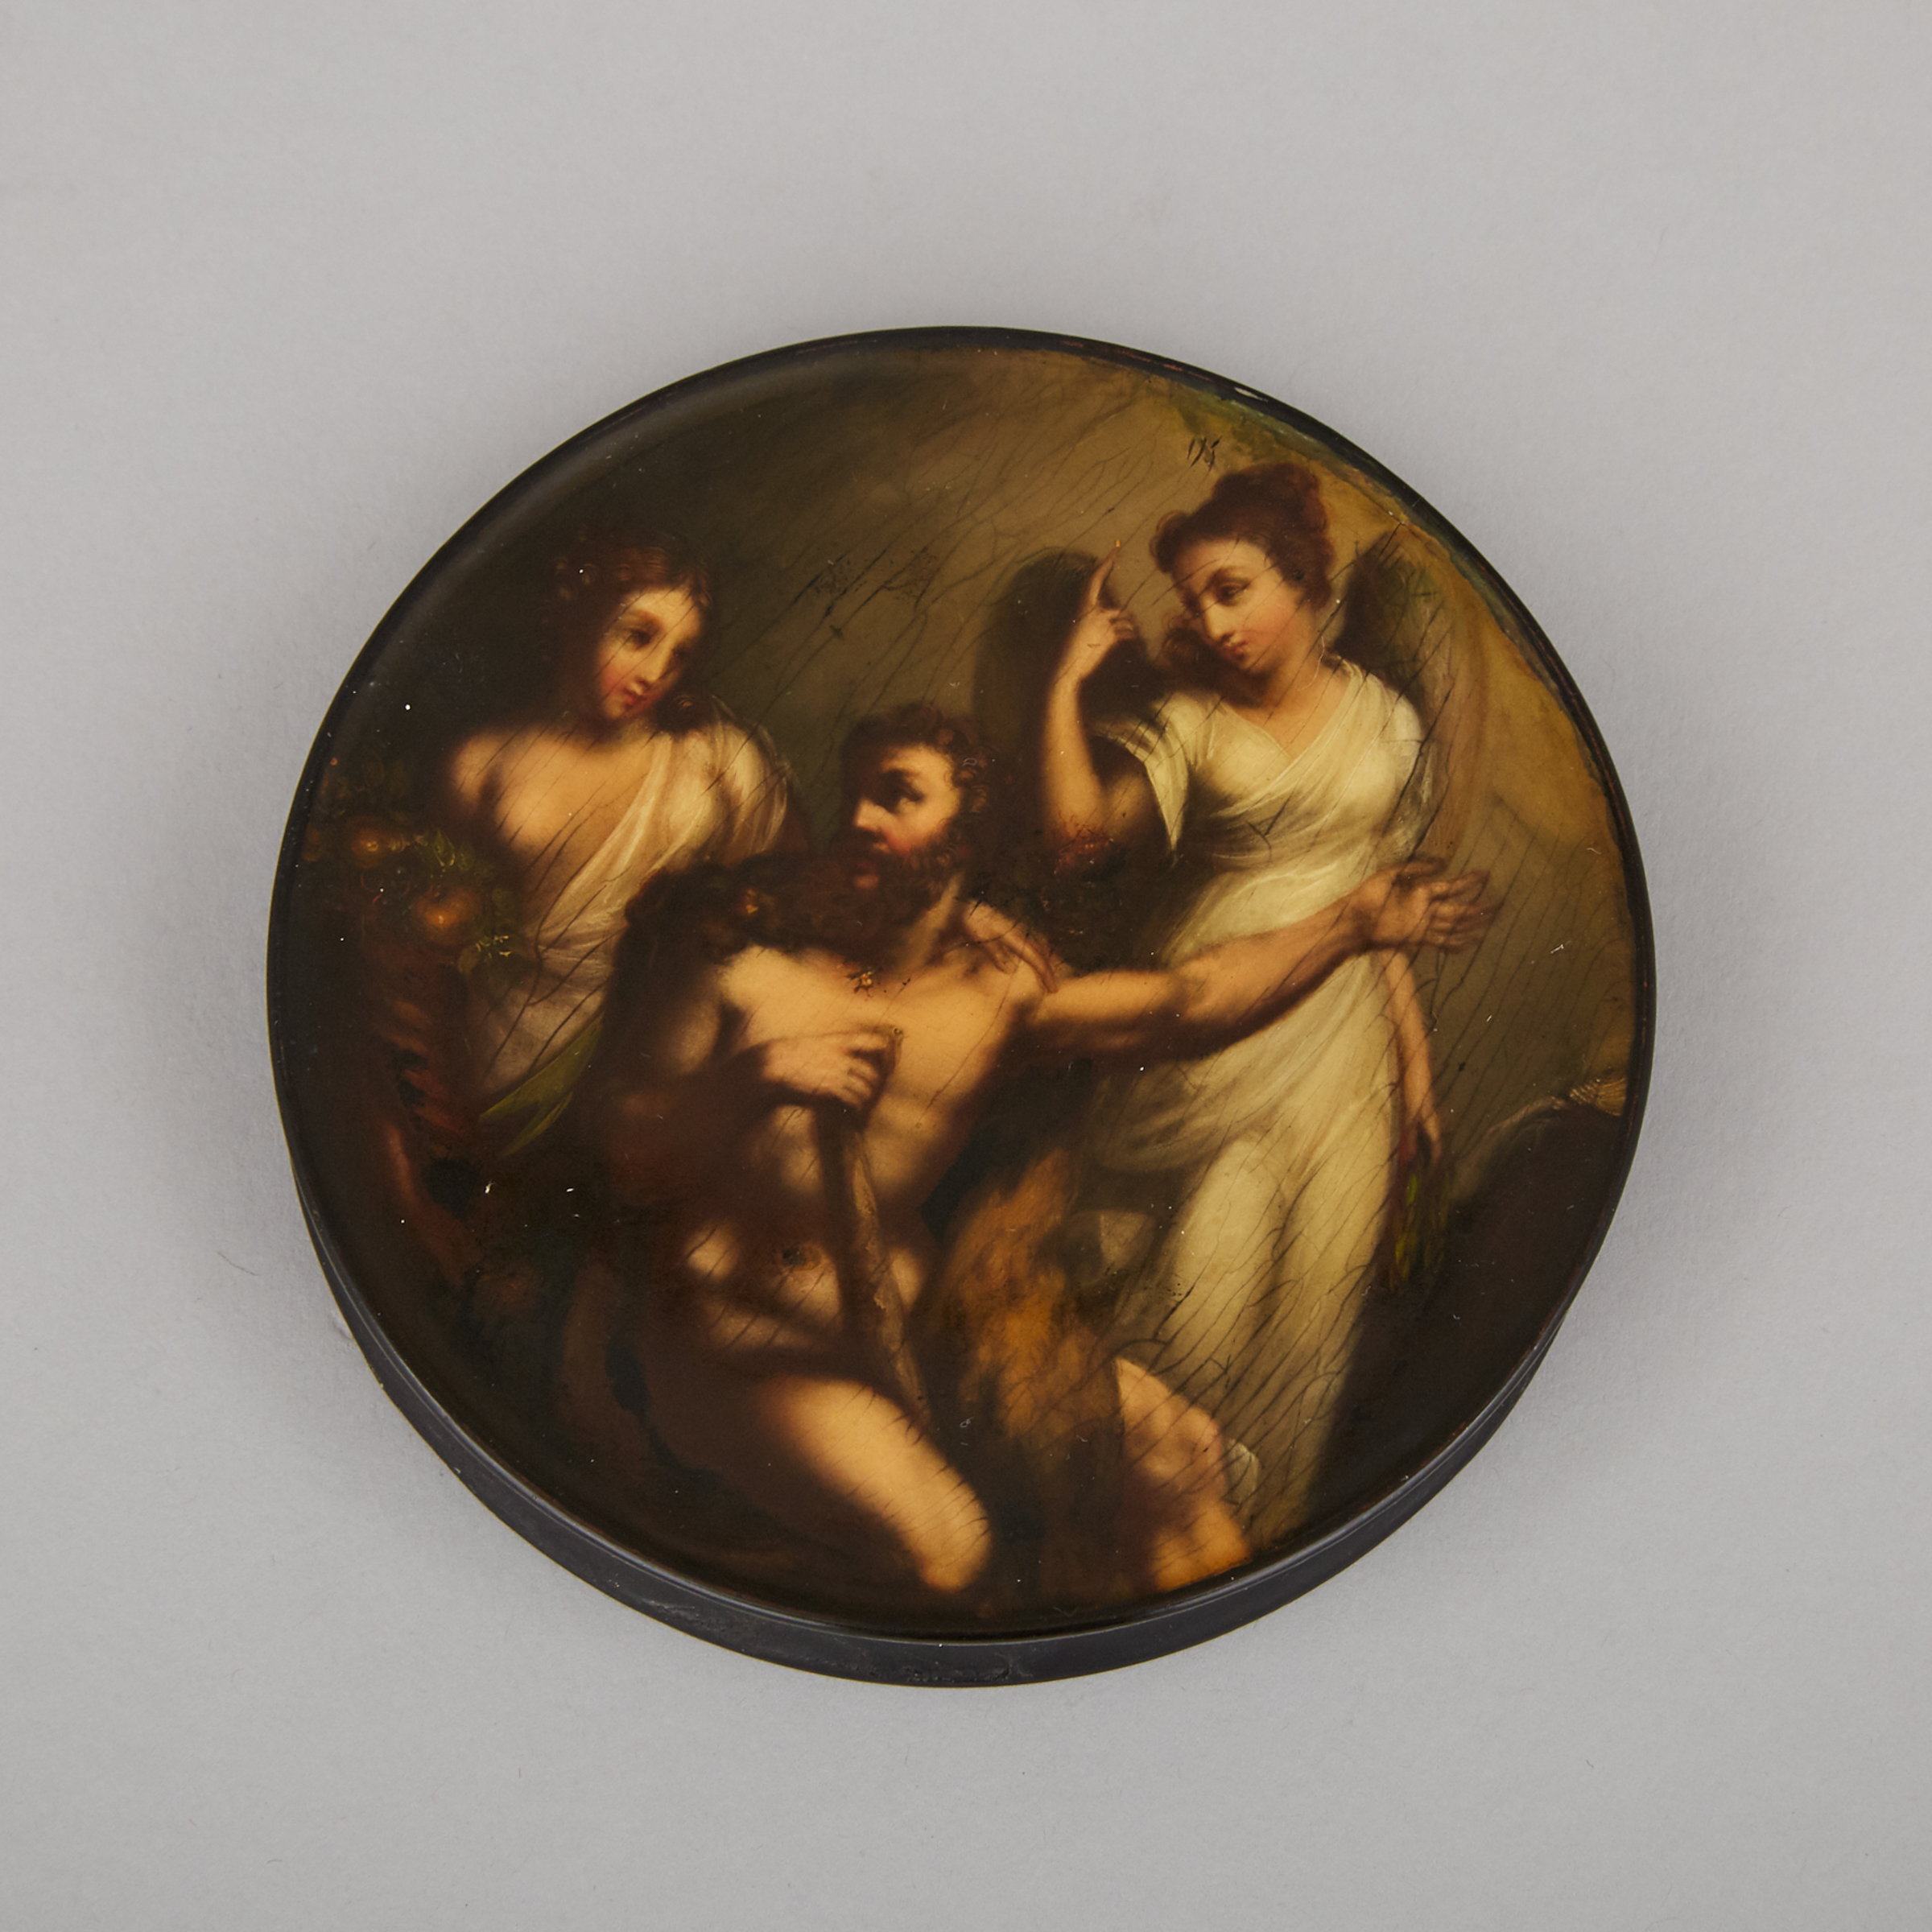 German Lacquer Neoclassical Snuff Box by Stobwasser, early 19th century